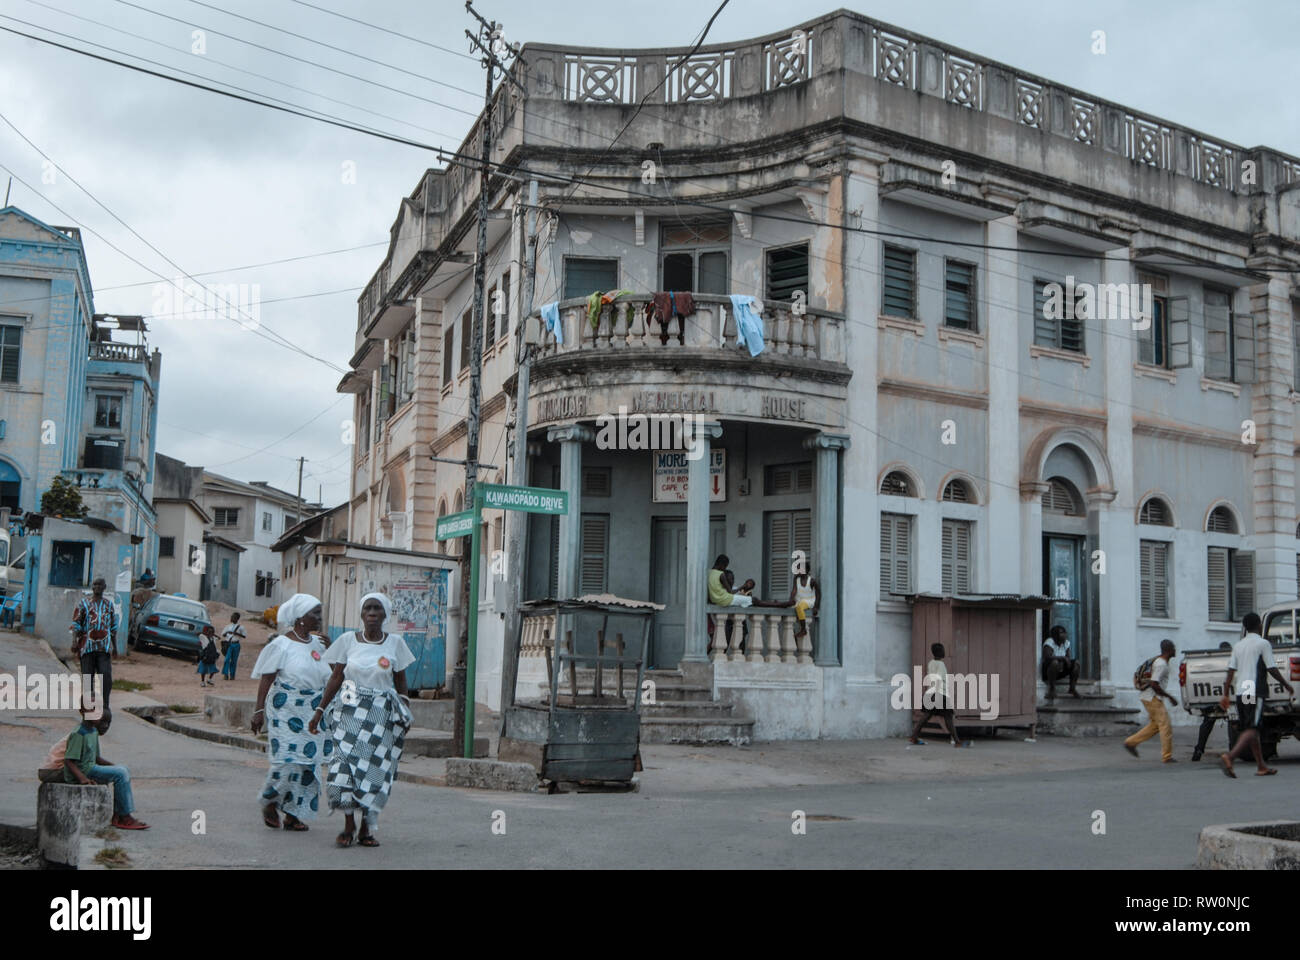 A nice view on a busy street  with people and interesting architecture in the Ghanaian city of Elmina. Stock Photo